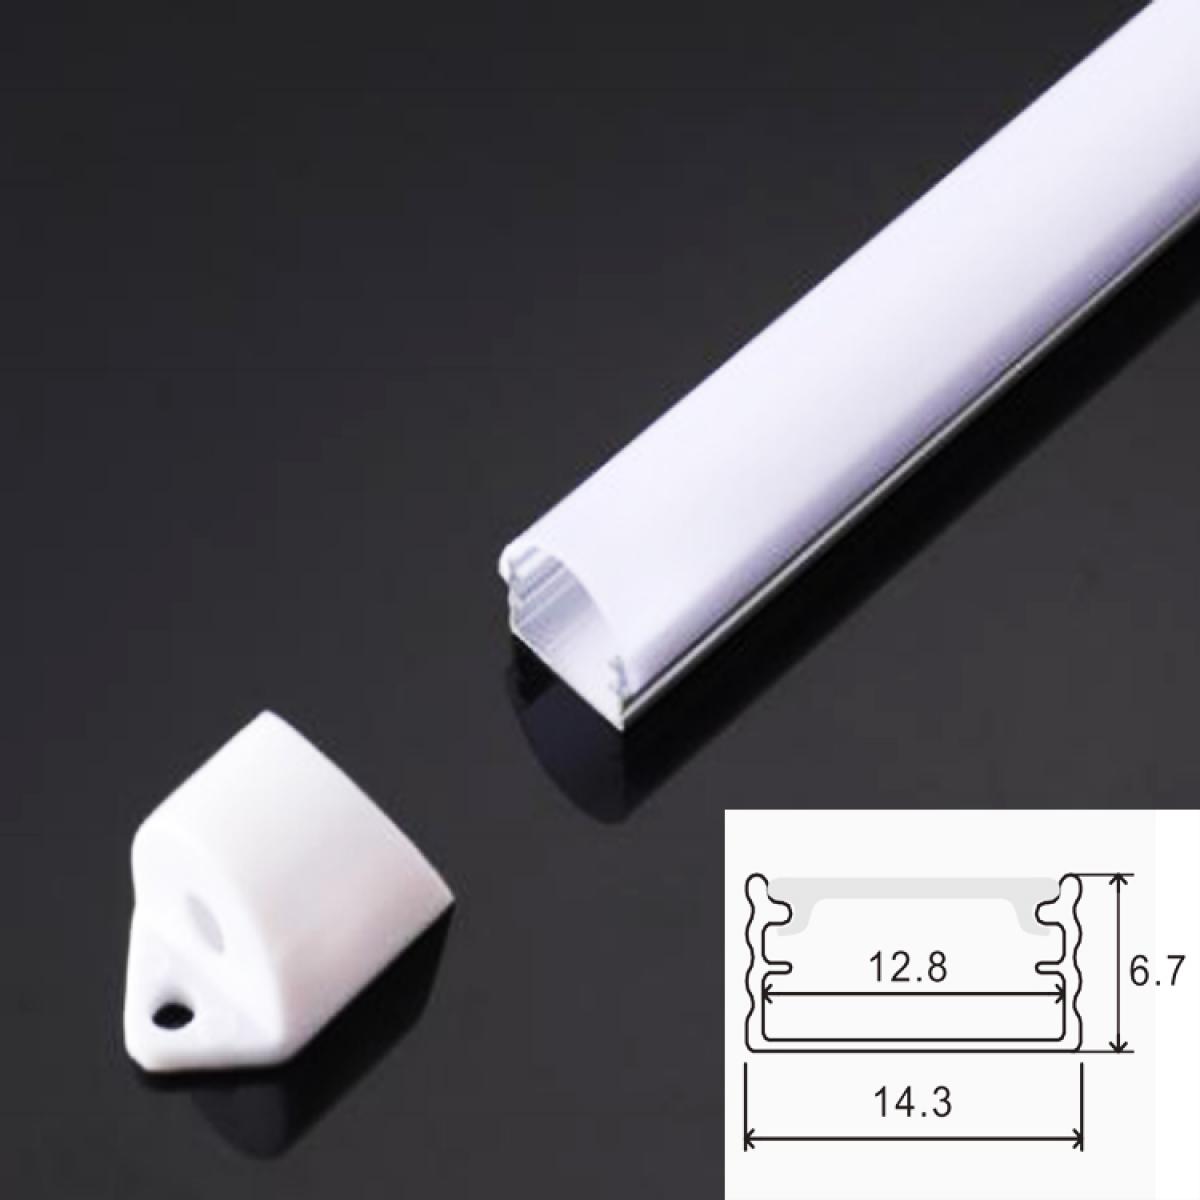 TXN-003E LX14X7MM Aluminum Led Profile For Drywall Kitchen Ultra Thin Micro Extruded Led Lighting